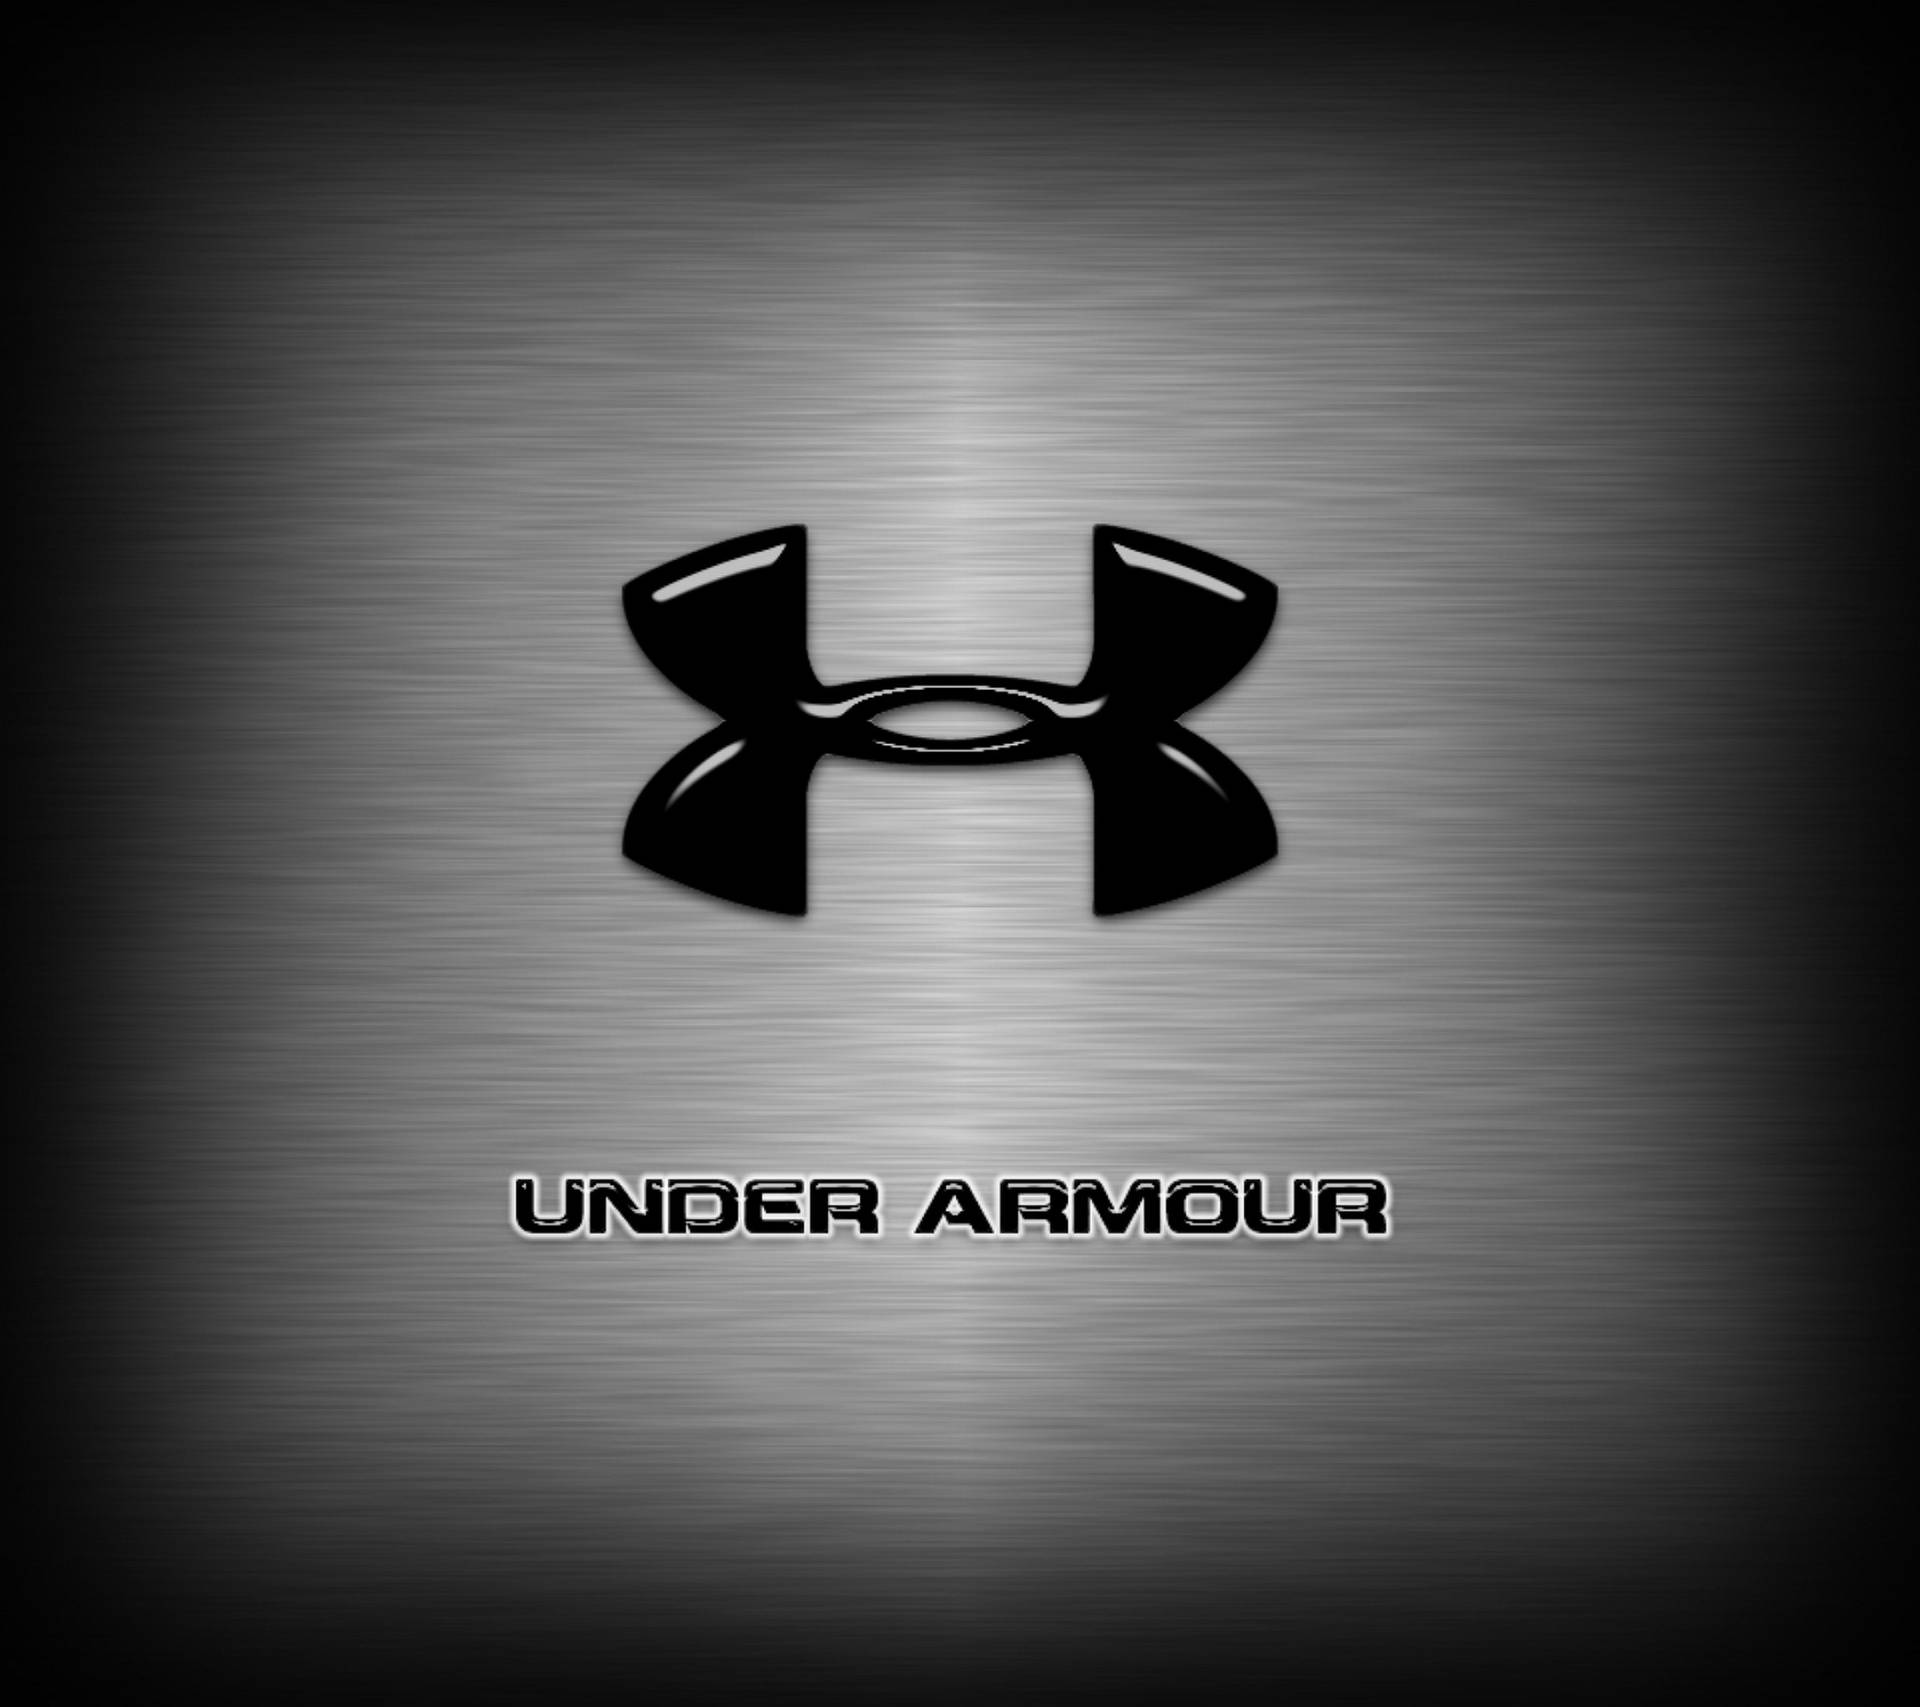 100+] Under Armour Pictures